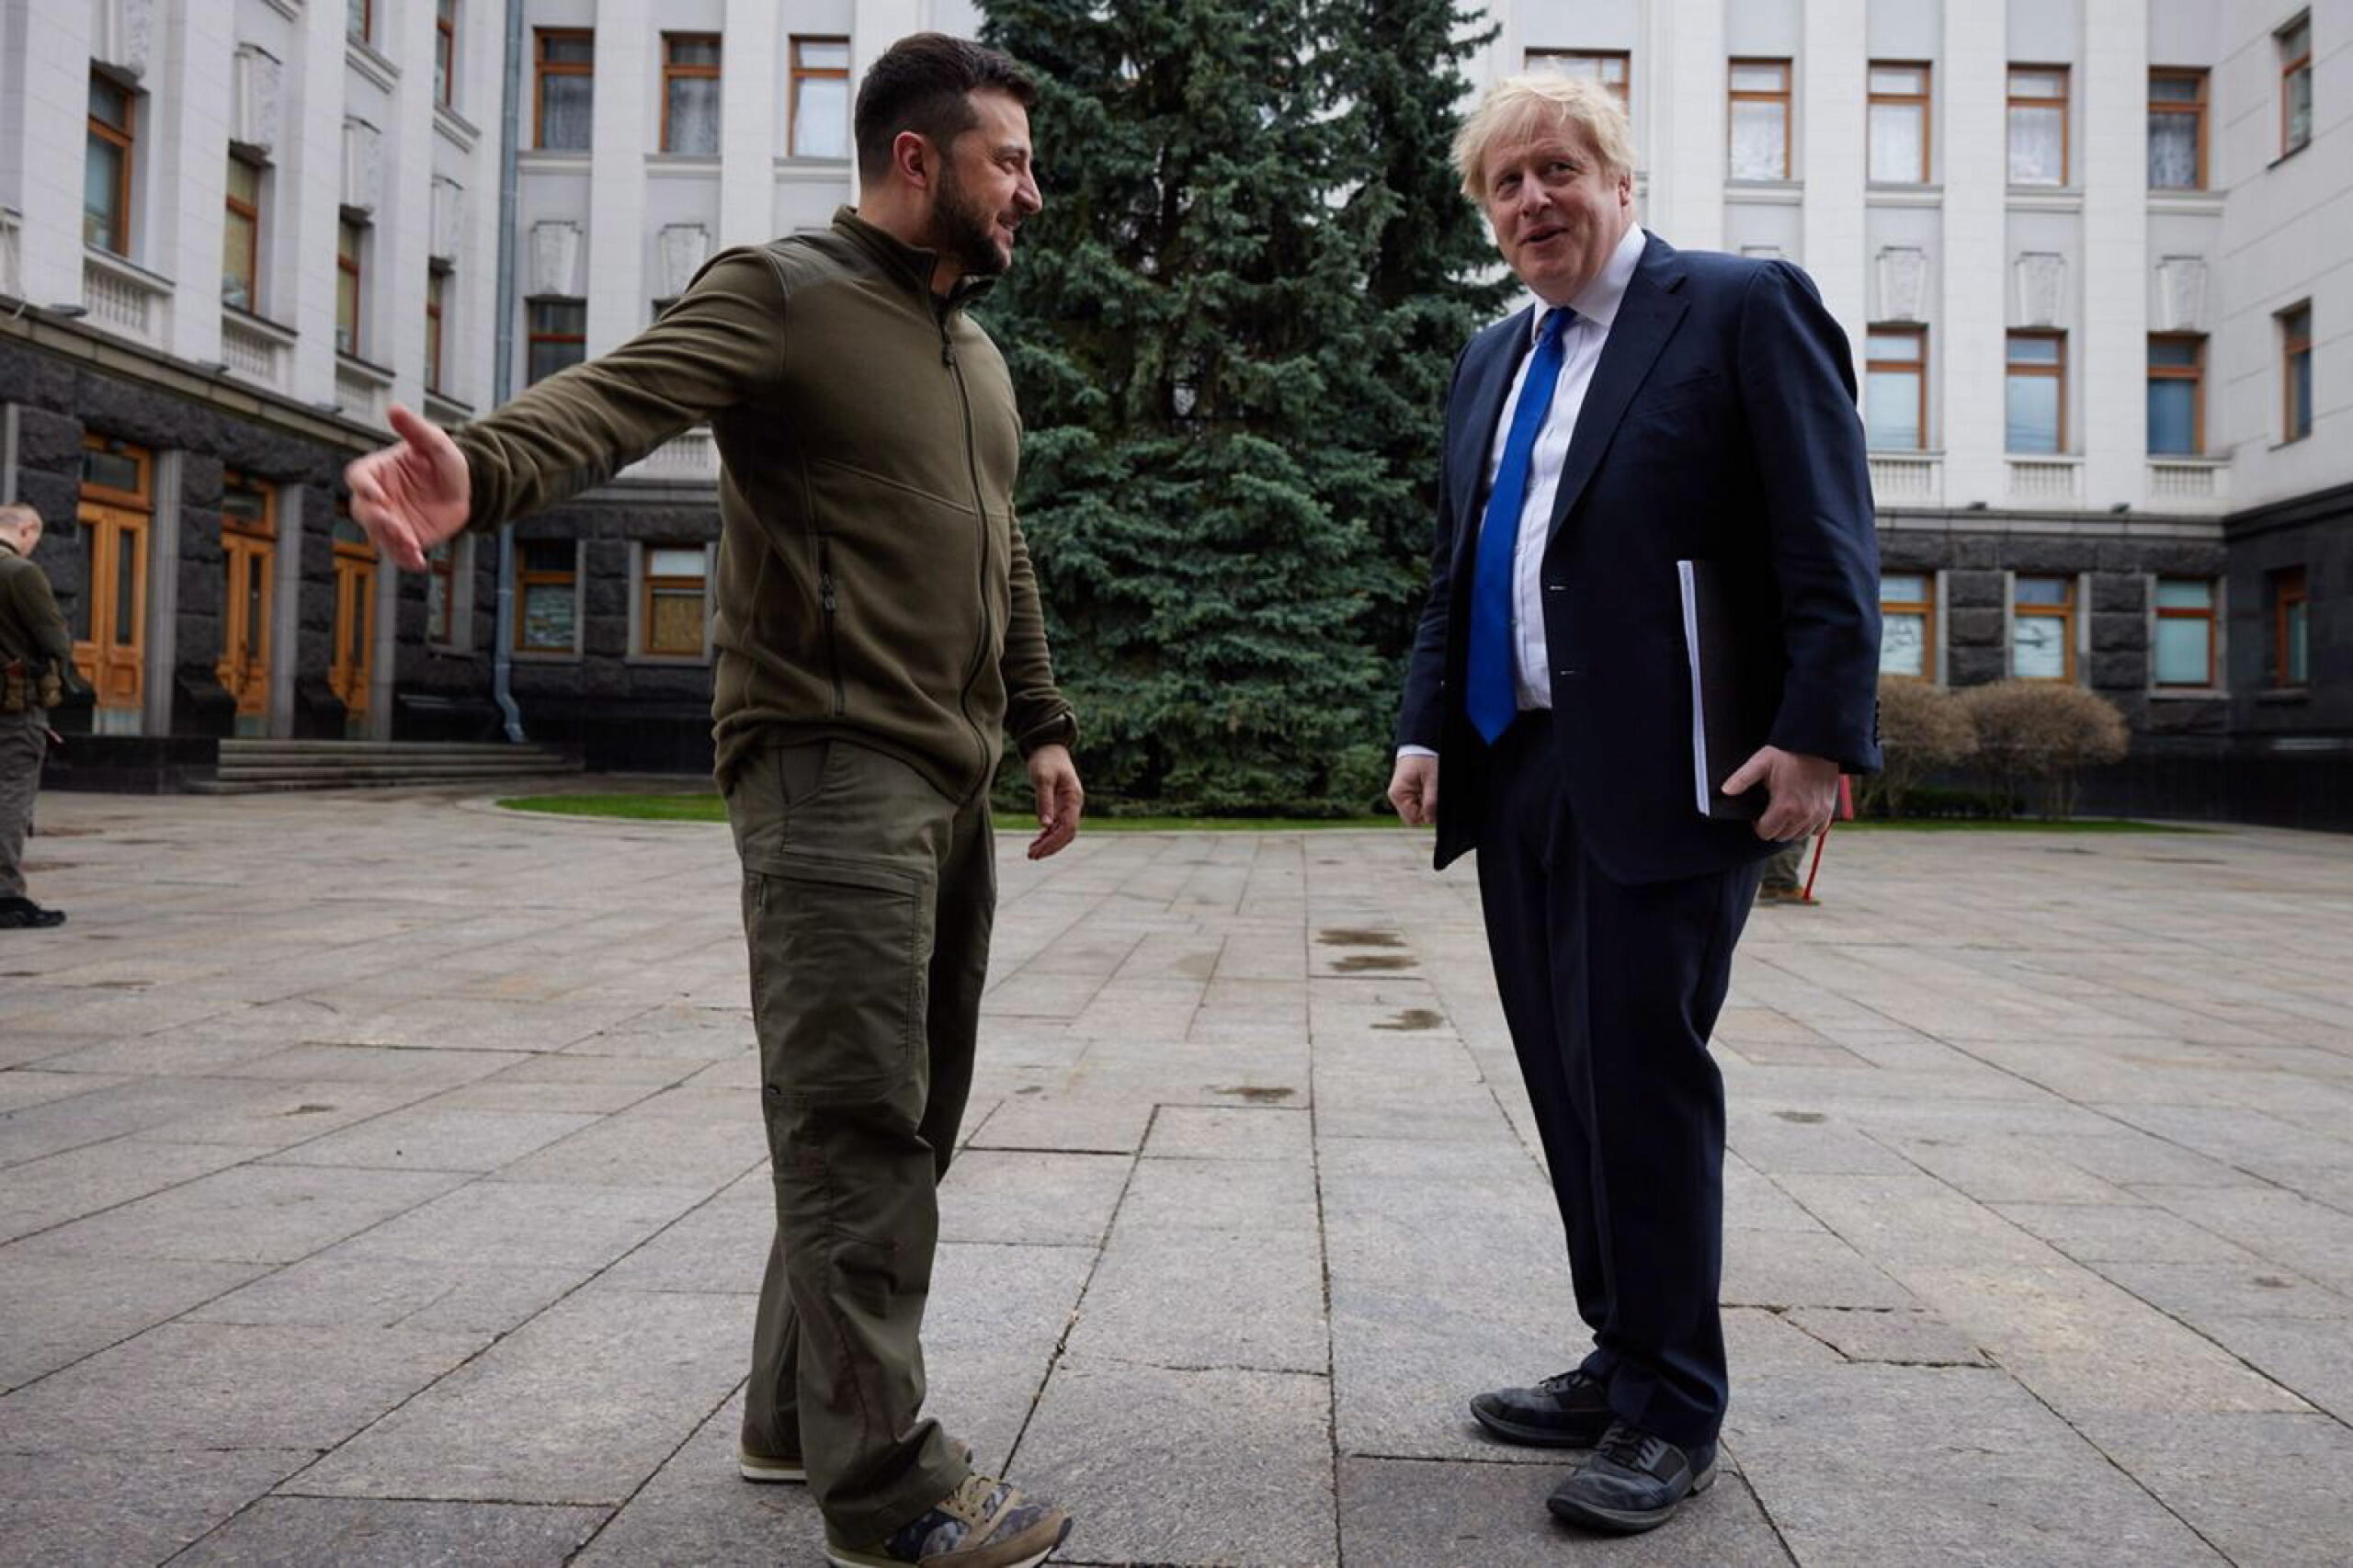 epa09880485 A handout photo made available via the official Telegram channel of the President of Ukraine shows Ukrainian President Volodymyr Zelensky (L) welcomes British Prime Minister Boris Johnson (R) for a meeting in Kyiv (Kiev), Ukraine, 09 April 2022. Johnson arrived in Kyiv on an unannounced surprise visit.  EPA/TELEGRAM/V_Zelenskiy_official / HANDOUT  HANDOUT EDITORIAL USE ONLY/NO SALES